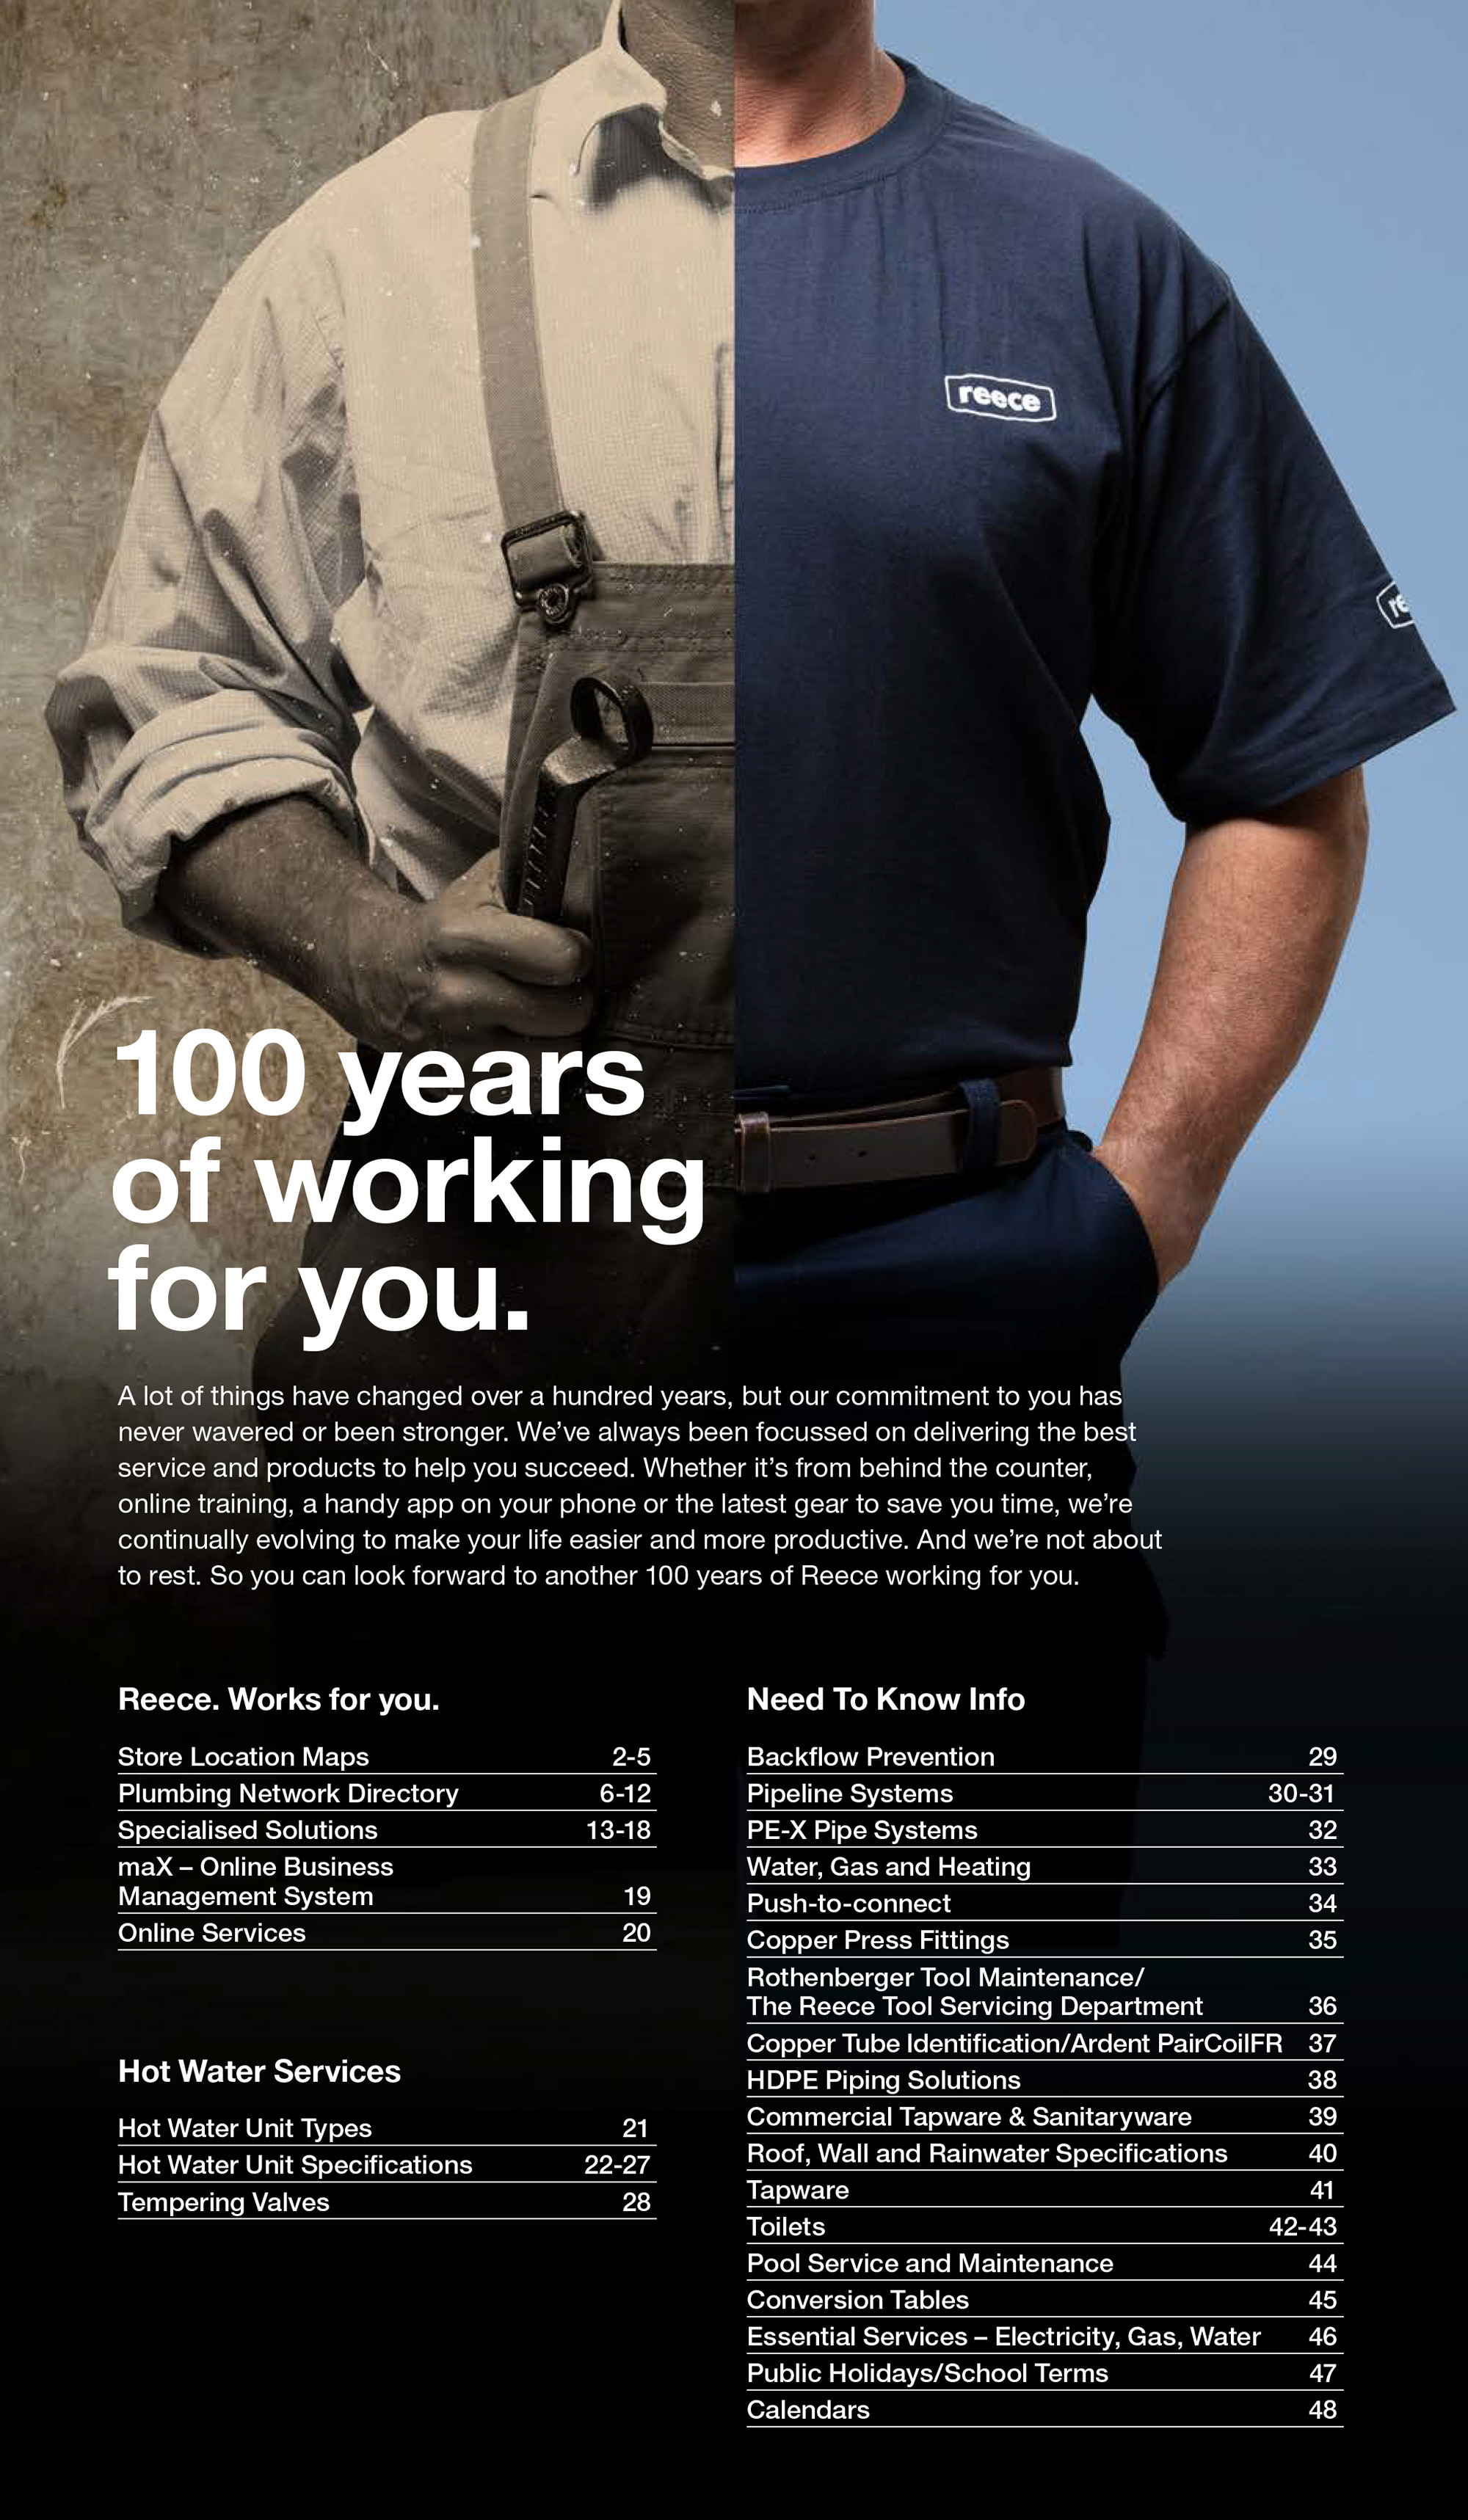 Campaign-thom-rigney-professional-photographer-advertising-commissioned-reece-plumbing-melbourne-australia-tradesman-010